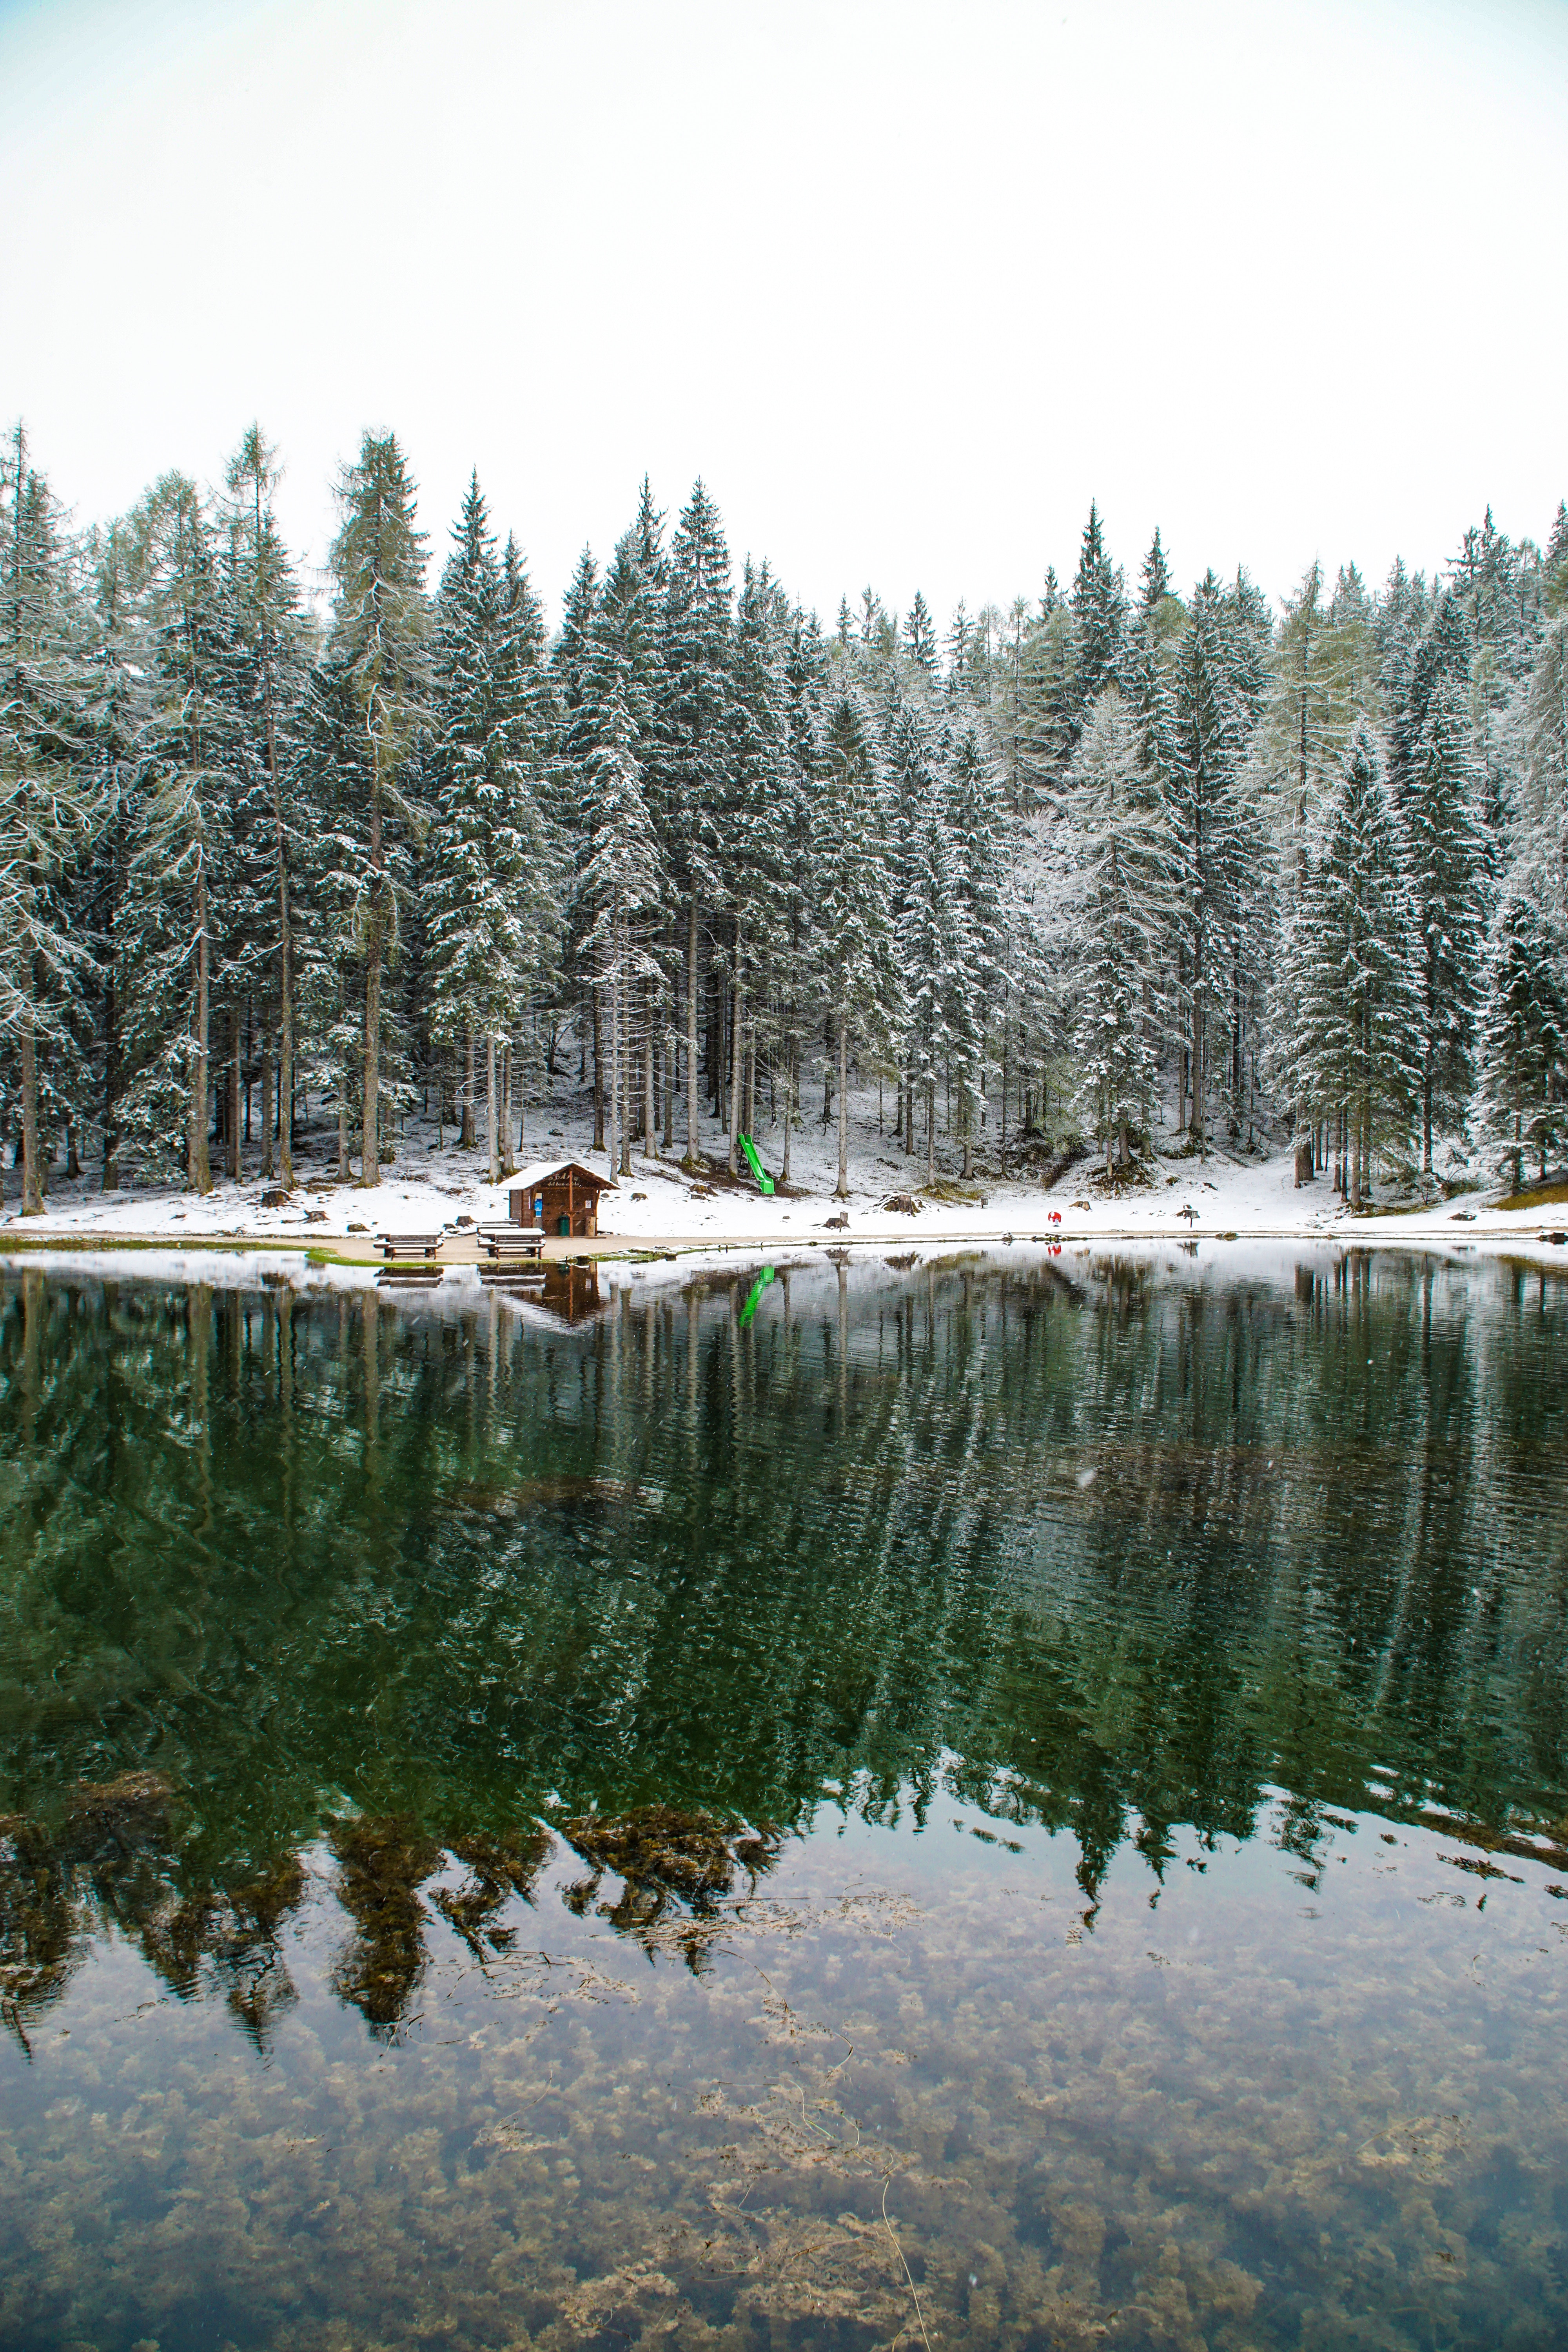 snow, small house, landscape, nature, lake, privacy, seclusion, forest, lodge